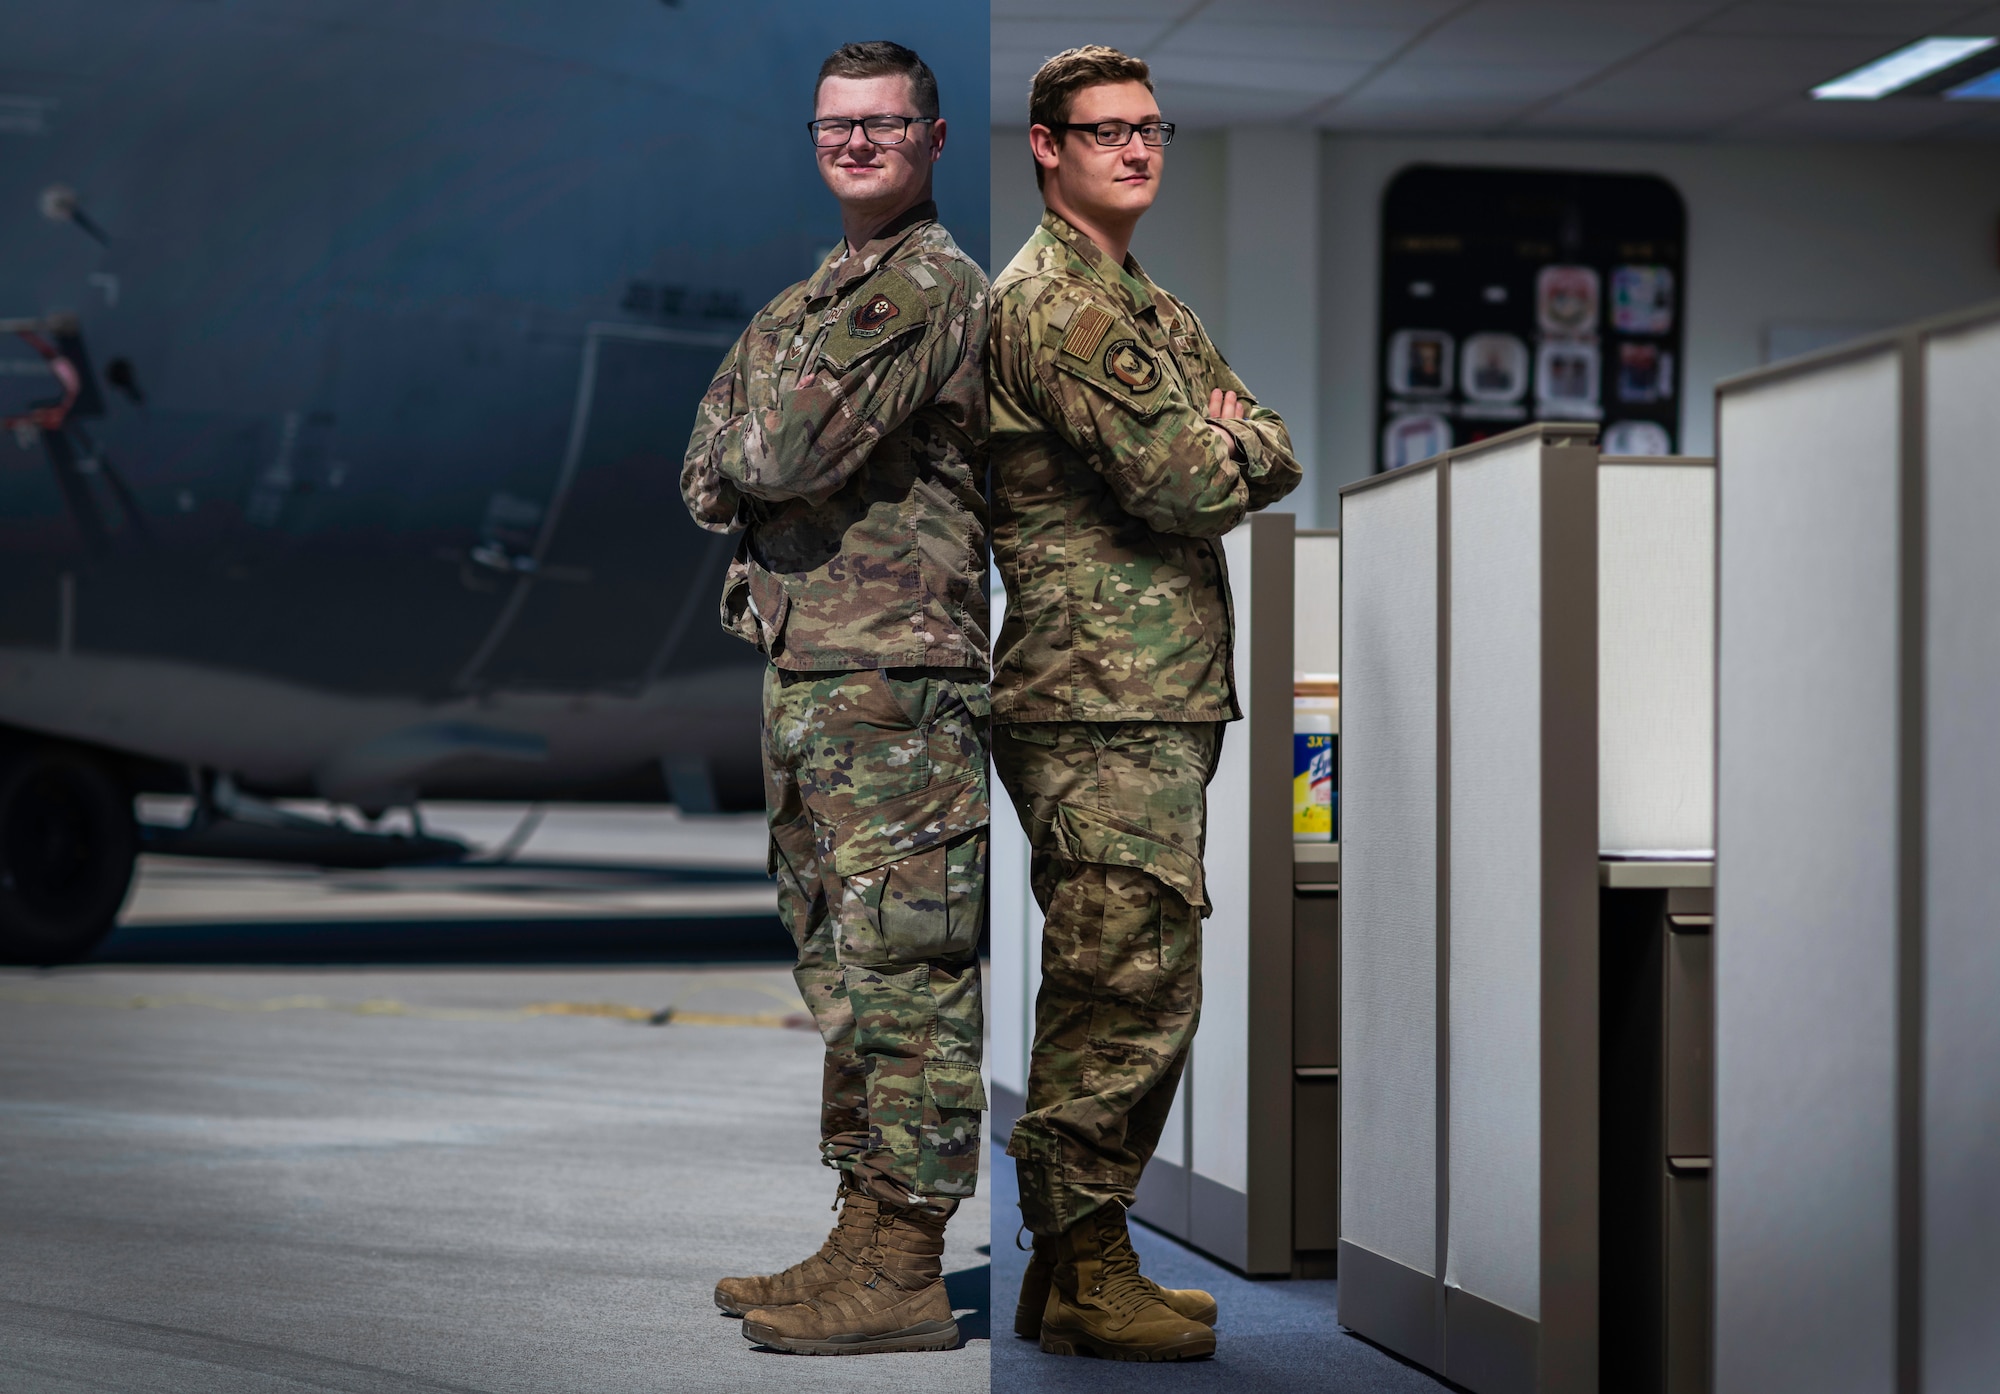 Senior Airman William Kirk, a MC-130J Commando II aircraft crew chief assigned to the 27th Special Operations Aircraft Maintenance Squadron, left, and Airman 1st Class Scott Kirk, a customer support technician with the 27th Special Operations Force Support Squadron, pose for a photo in their respective workplaces on Cannon Air Force Base, New Mexico, Feb. 26, 2020. The two brothers hail from Evansville, Indiana, and are stationed at Cannon together where they use each other as a support system to build resiliency. (U.S. Air Force photo illustration by Senior Airman Maxwell Daigle)